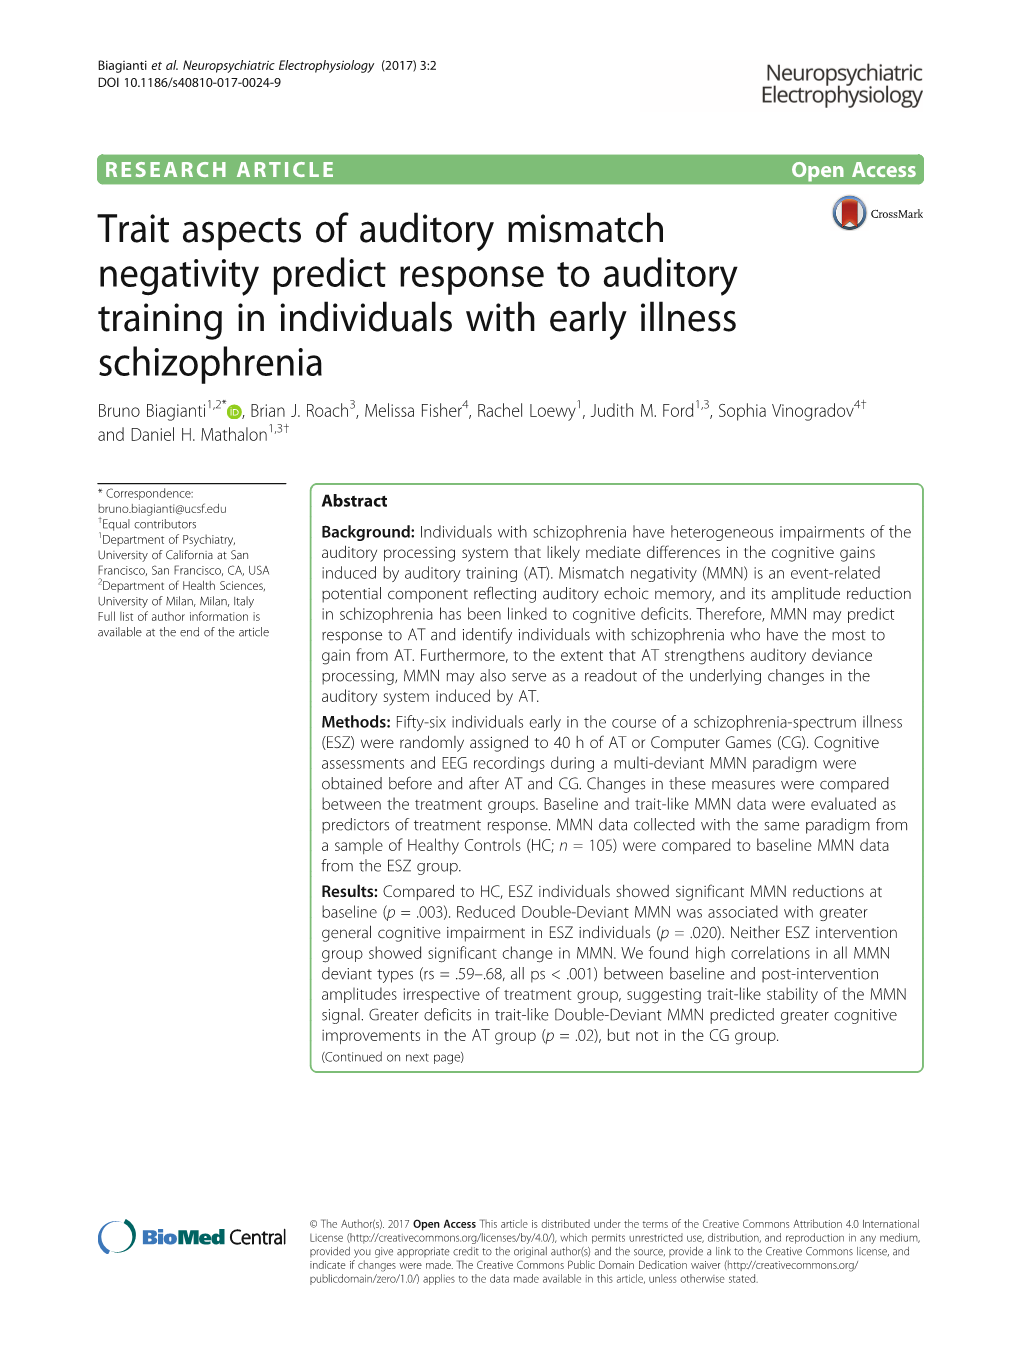 Trait Aspects of Auditory Mismatch Negativity Predict Response to Auditory Training in Individuals with Early Illness Schizophrenia Bruno Biagianti1,2* , Brian J